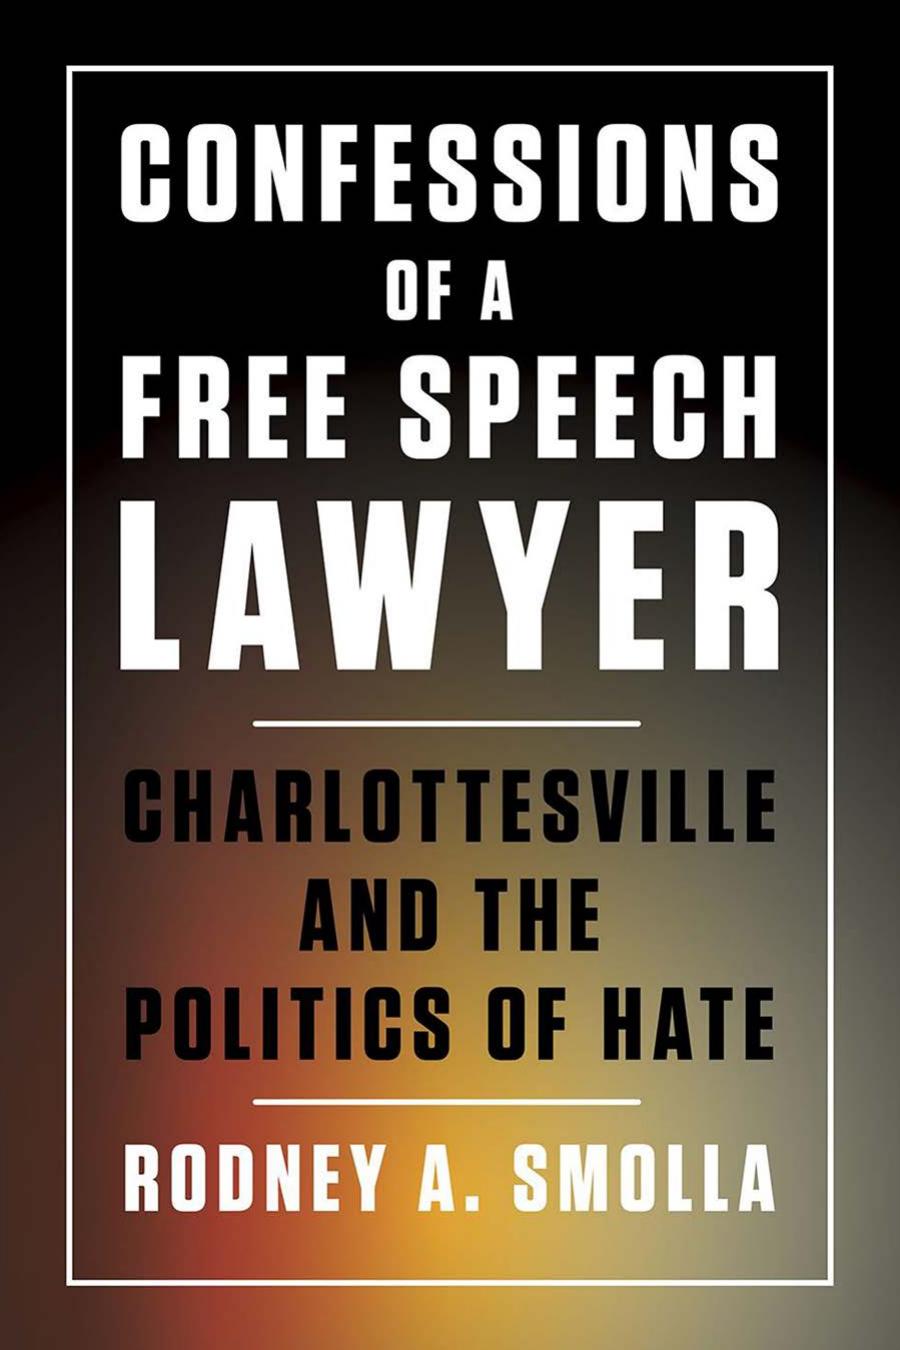 Confessions of a Free Speech Lawyer: Charlottesville and the Politics of Hate by Rodney A. Smolla